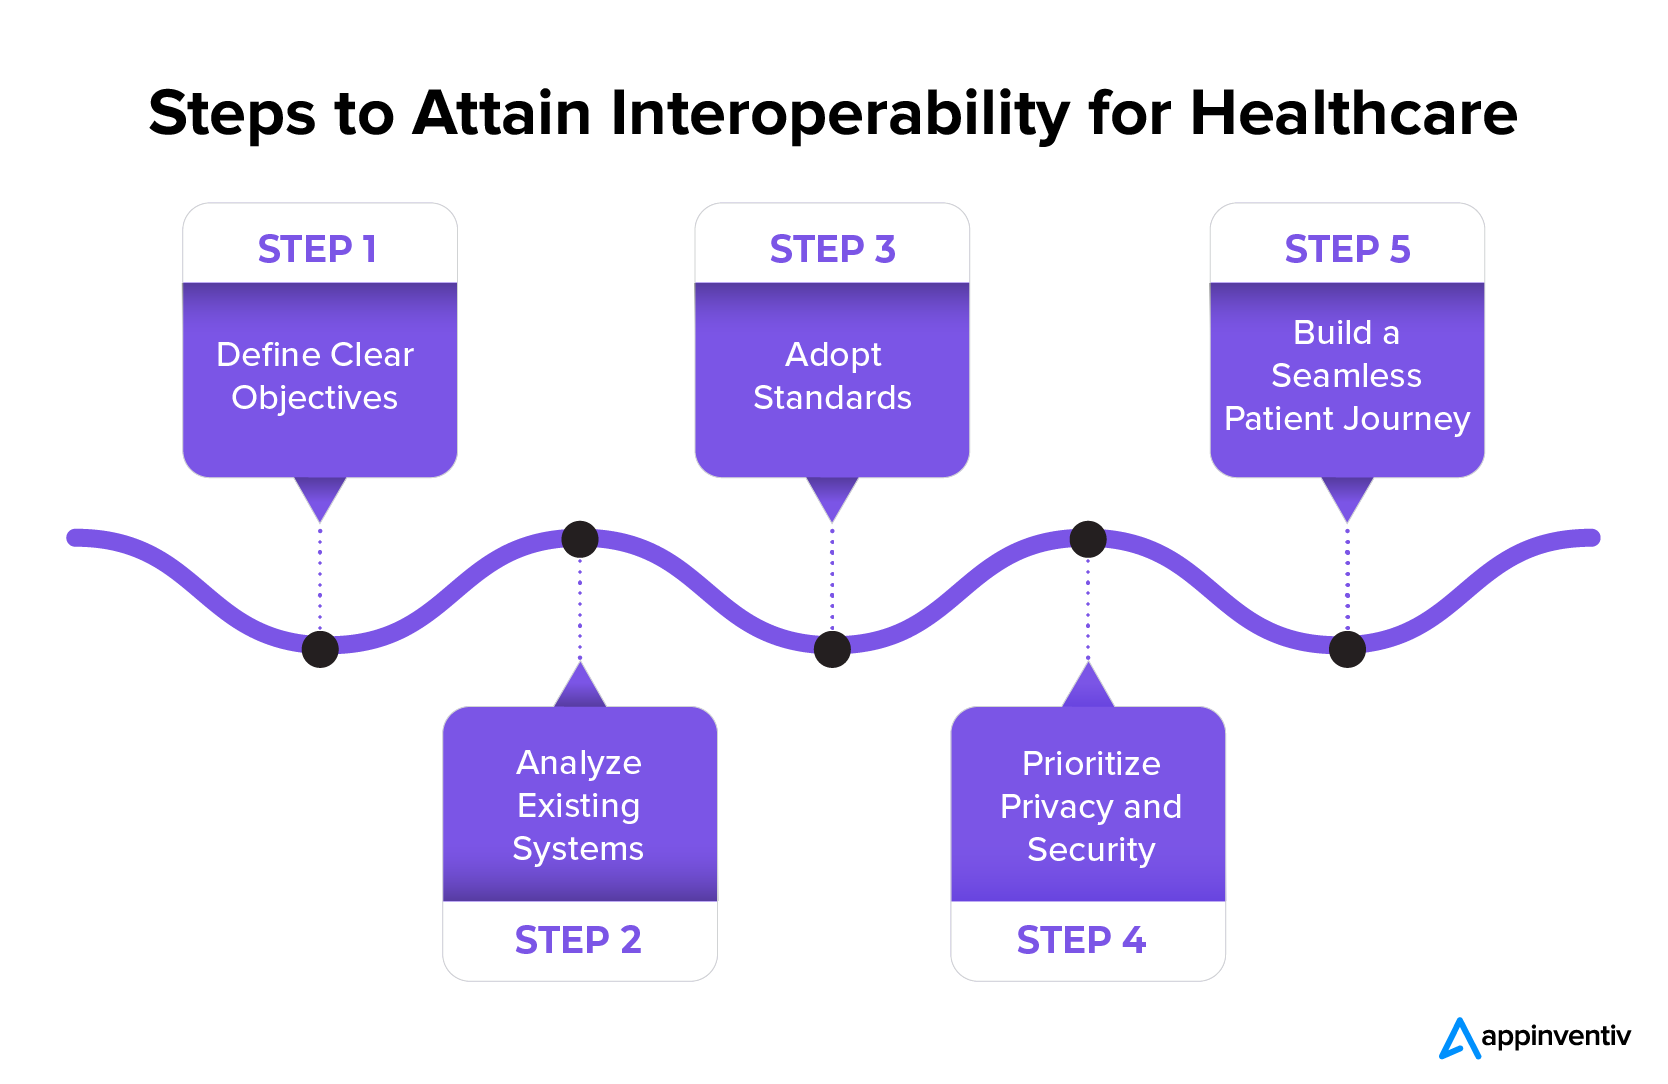 Steps to attain interoperability for healthcare